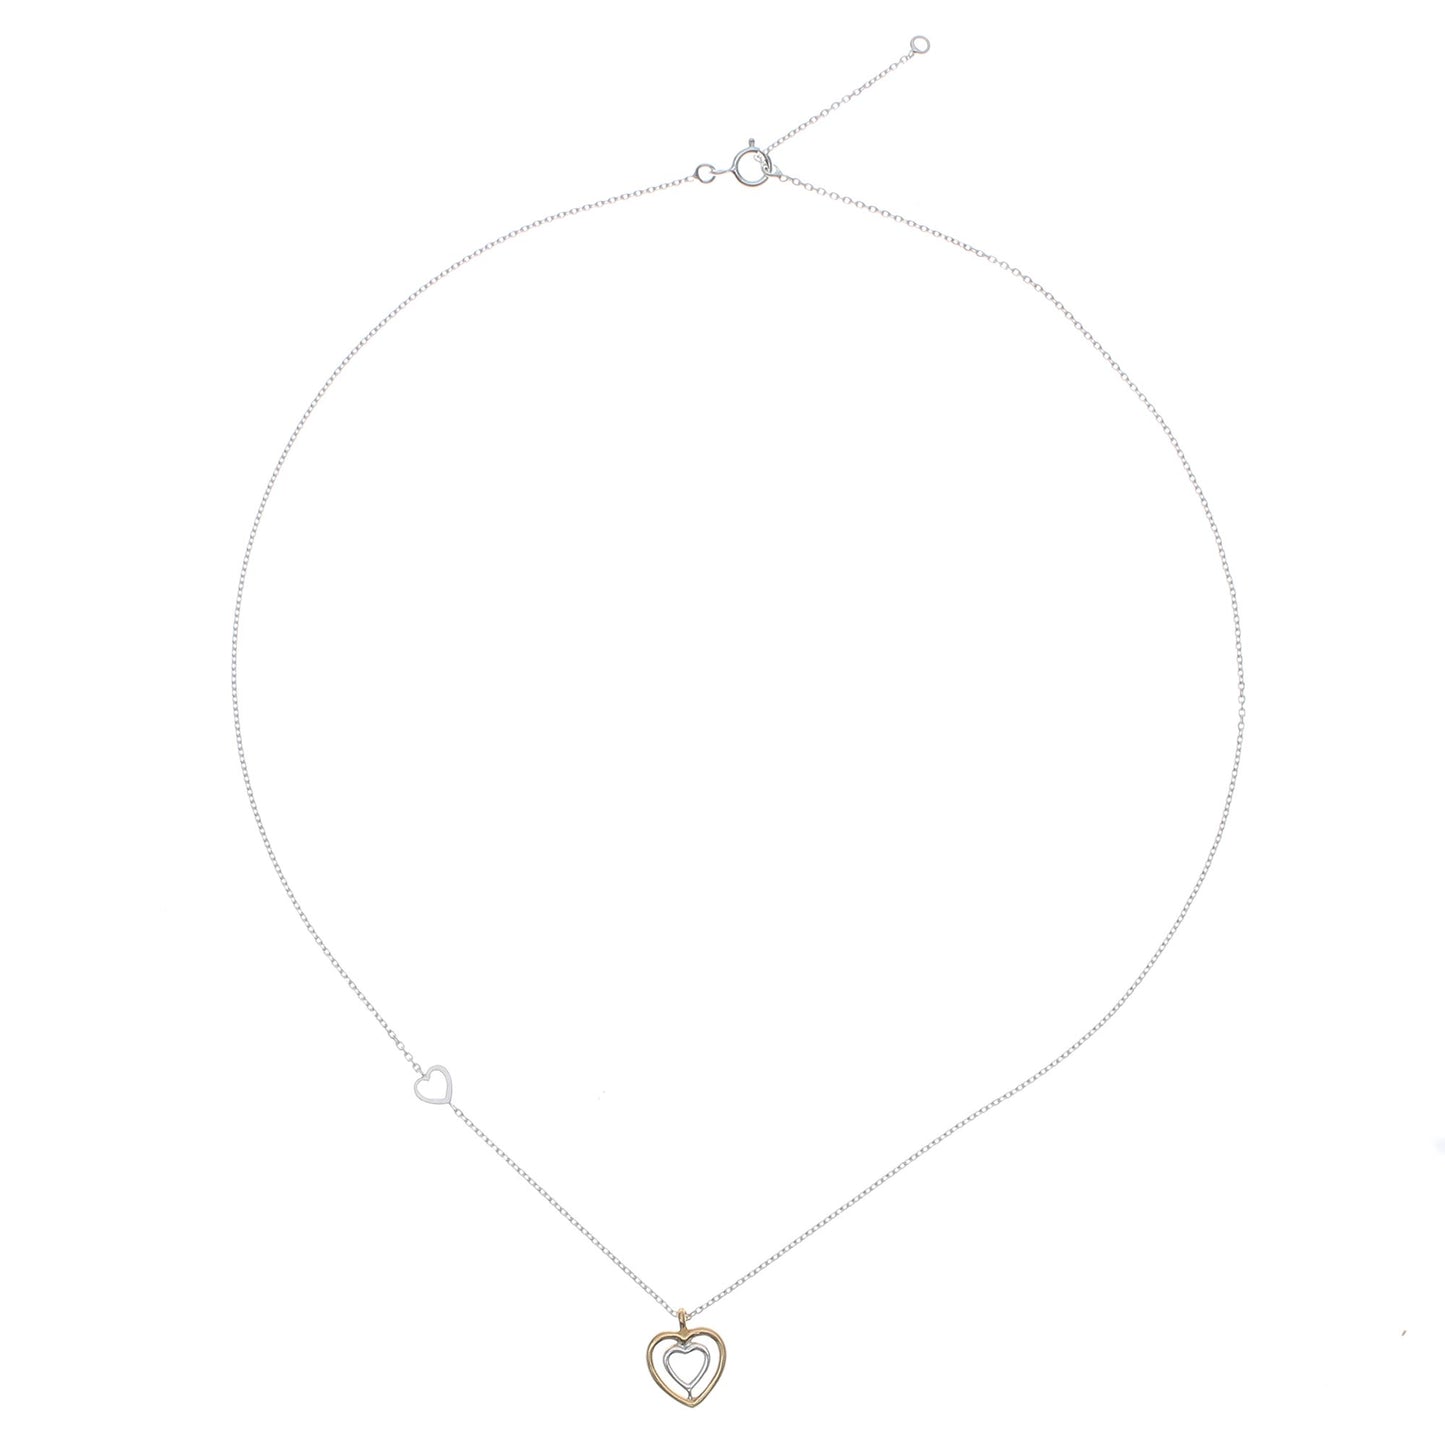 Lovely Heart Heart-Shaped Gold Accented Sterling Silver Pendant Necklace